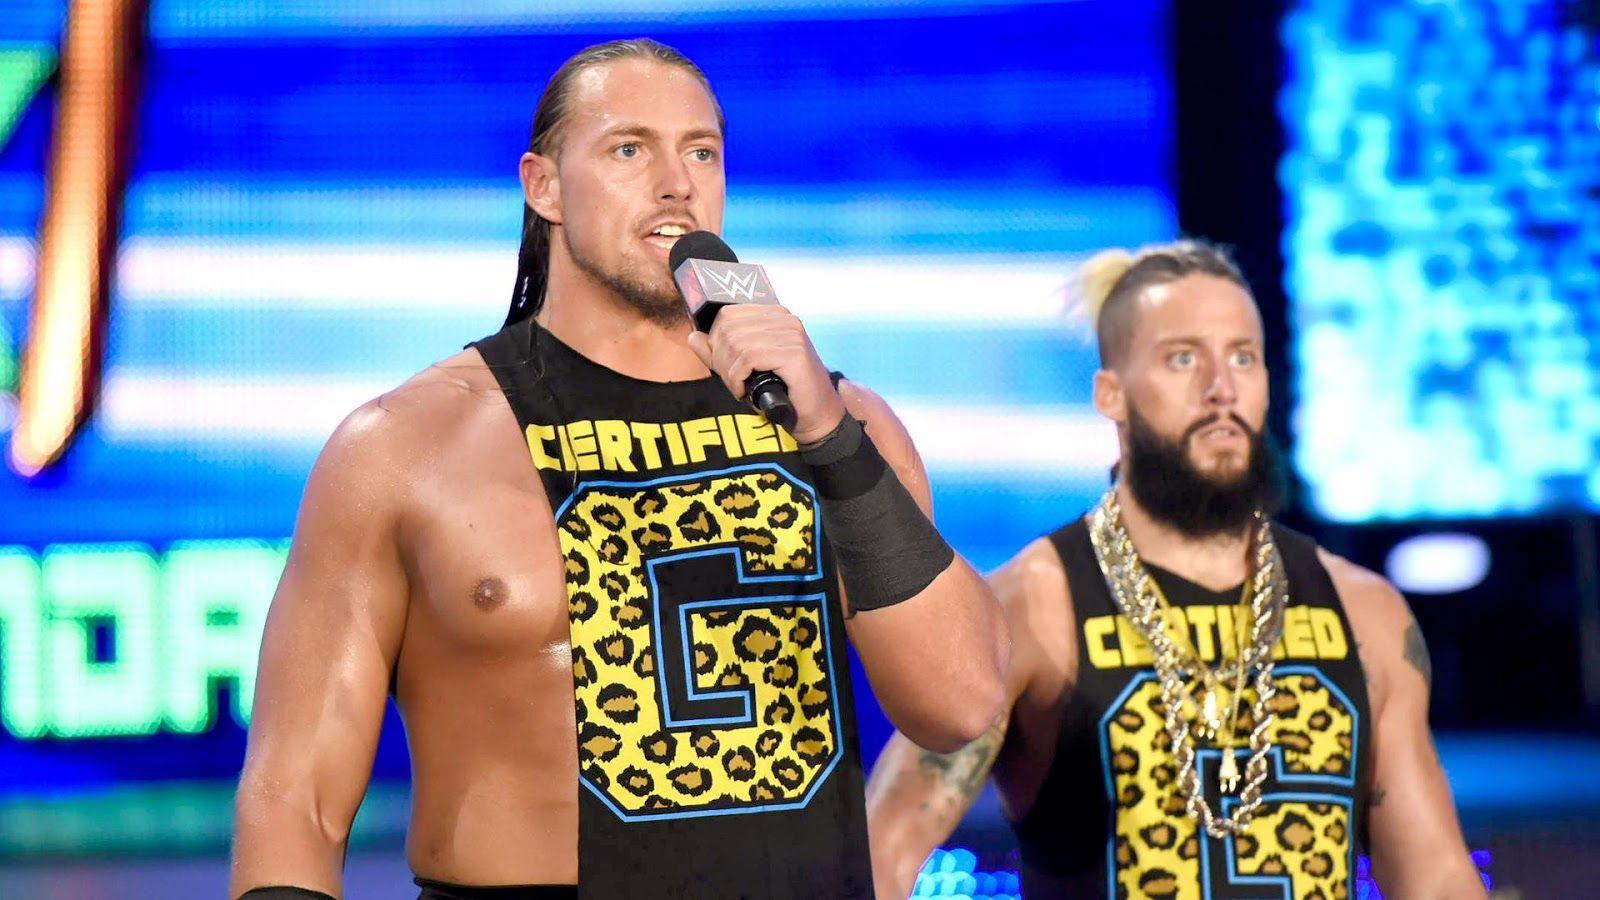 Big Cass Certified G Wallpaper image. Beautiful image HD Picture